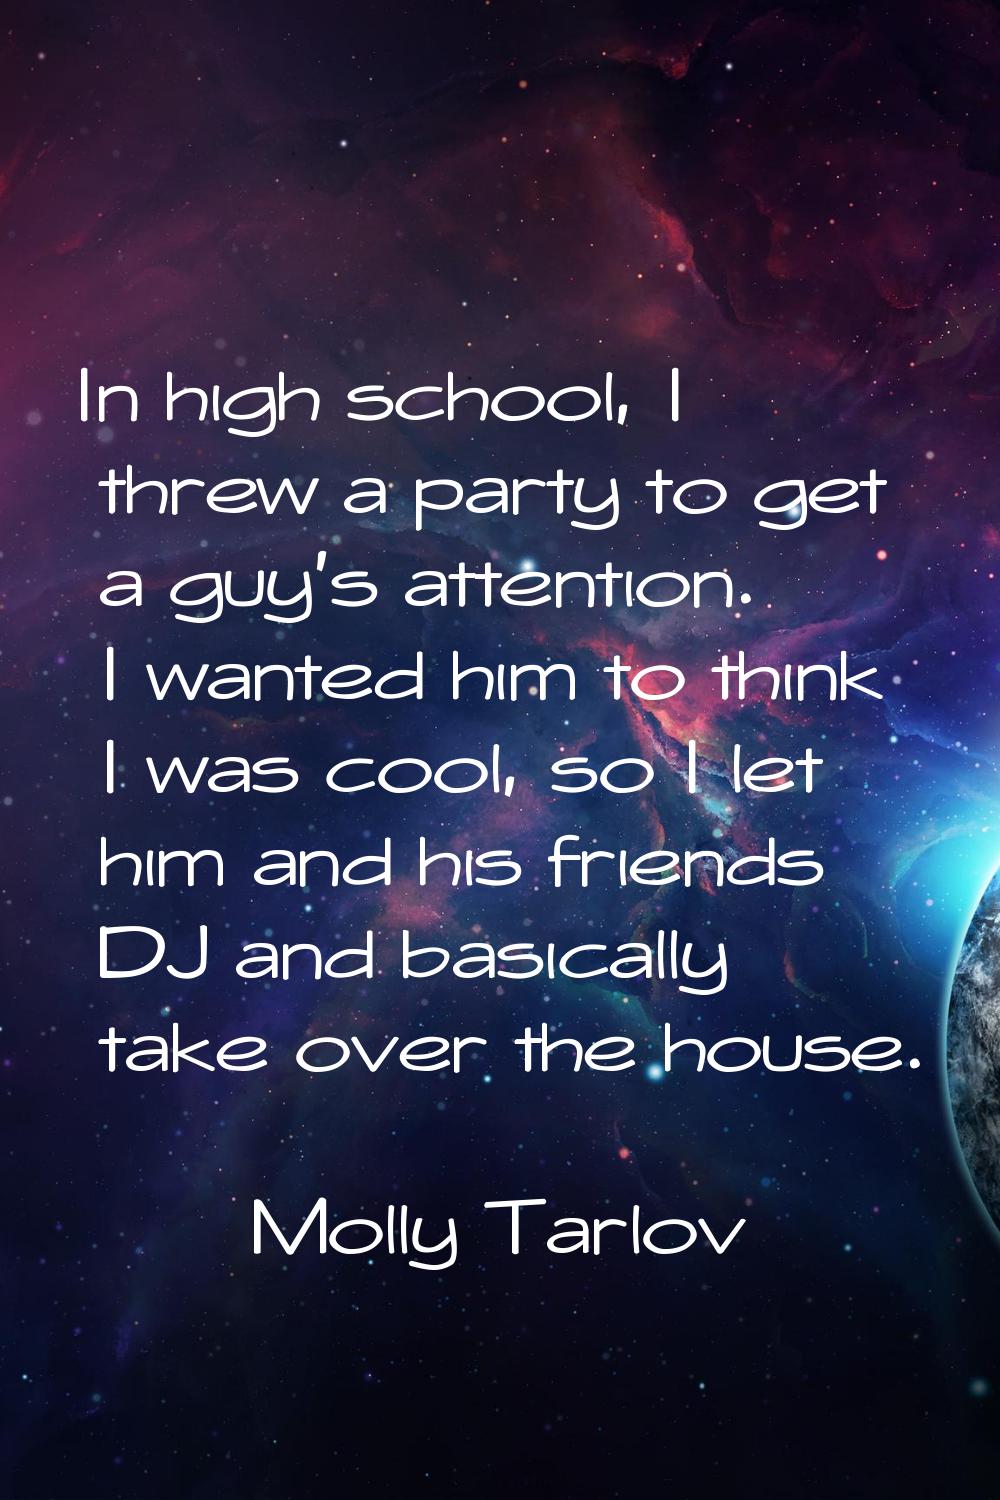 In high school, I threw a party to get a guy's attention. I wanted him to think I was cool, so I le